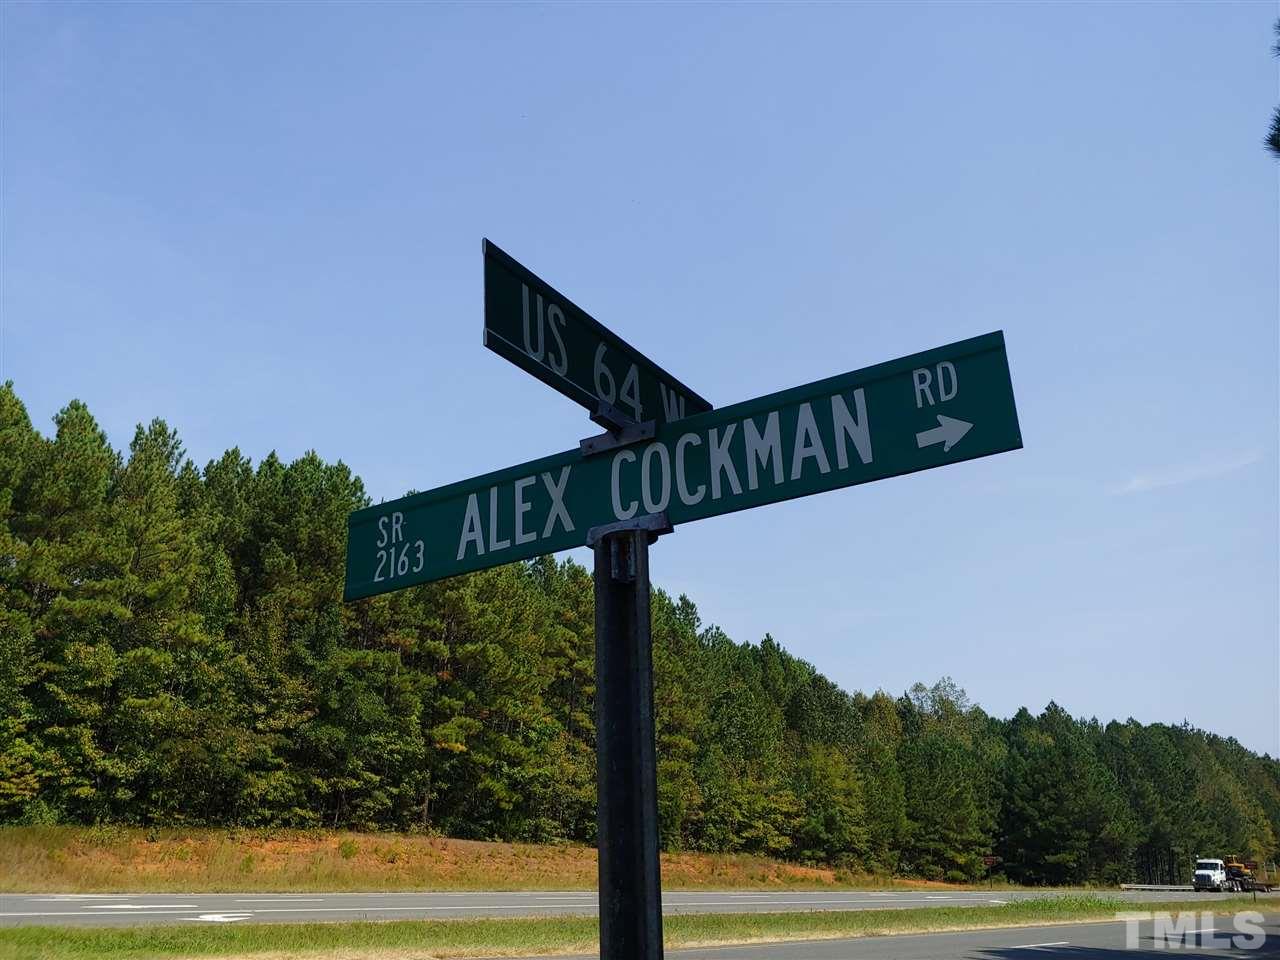 Intersection of US 64 W and Alex Cockman Rd.